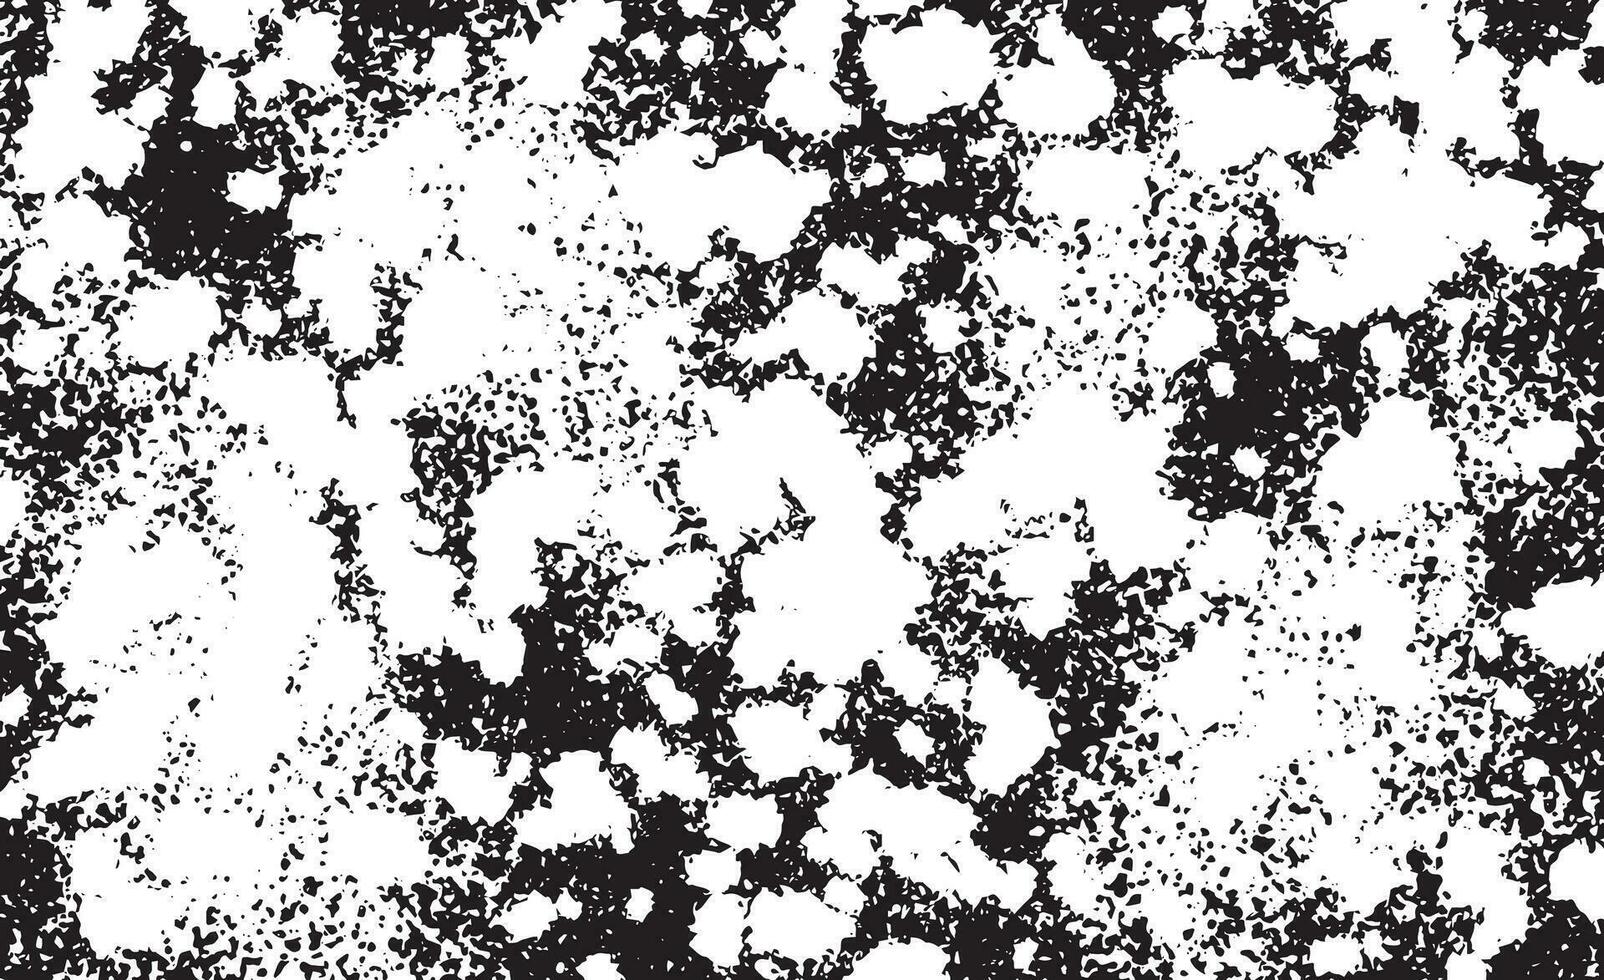 Grunge black and white texture.Grunge texture background.Grainy abstract texture on a white background.highly Detailed grunge background with space vector